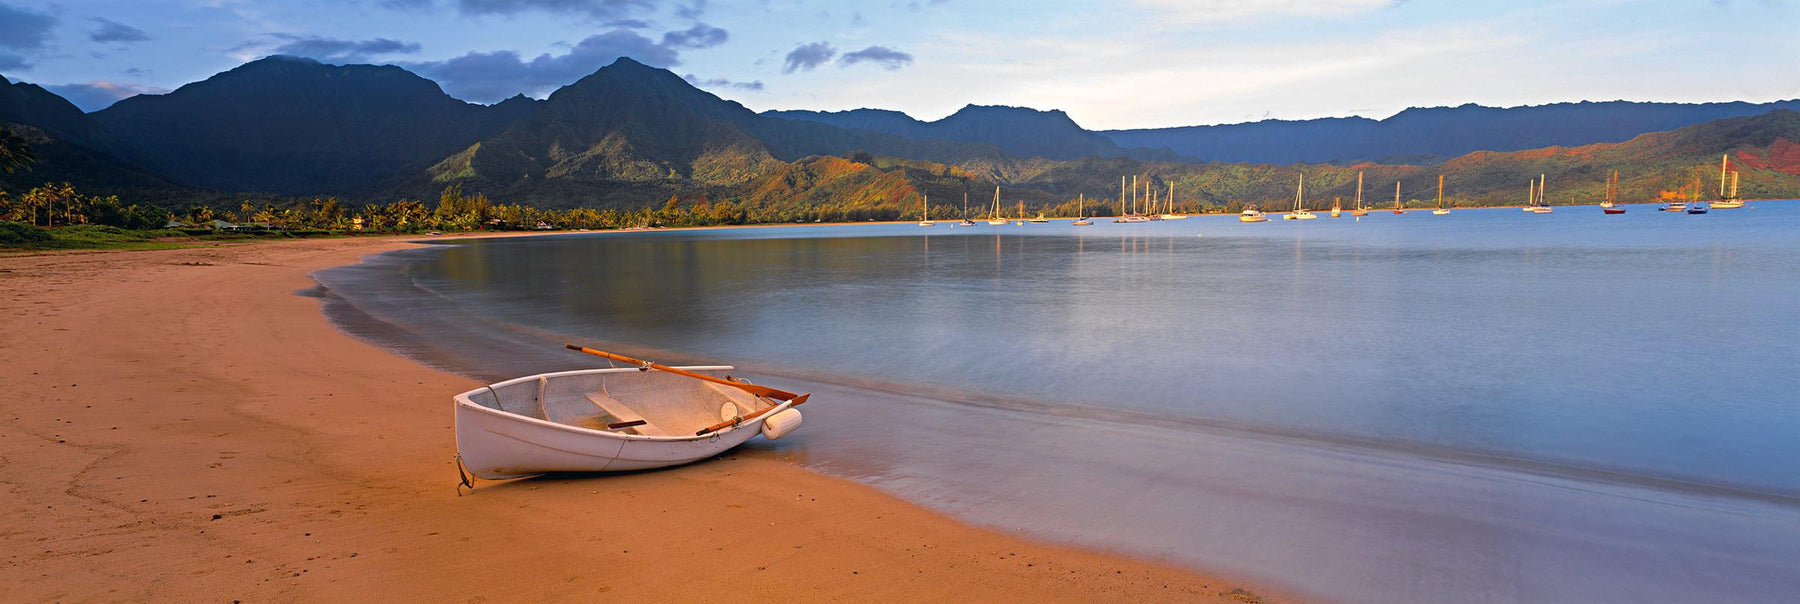 White row boat sitting on the shore of the sail boat filled Hanalei Bay Hawaii with mountains in the background